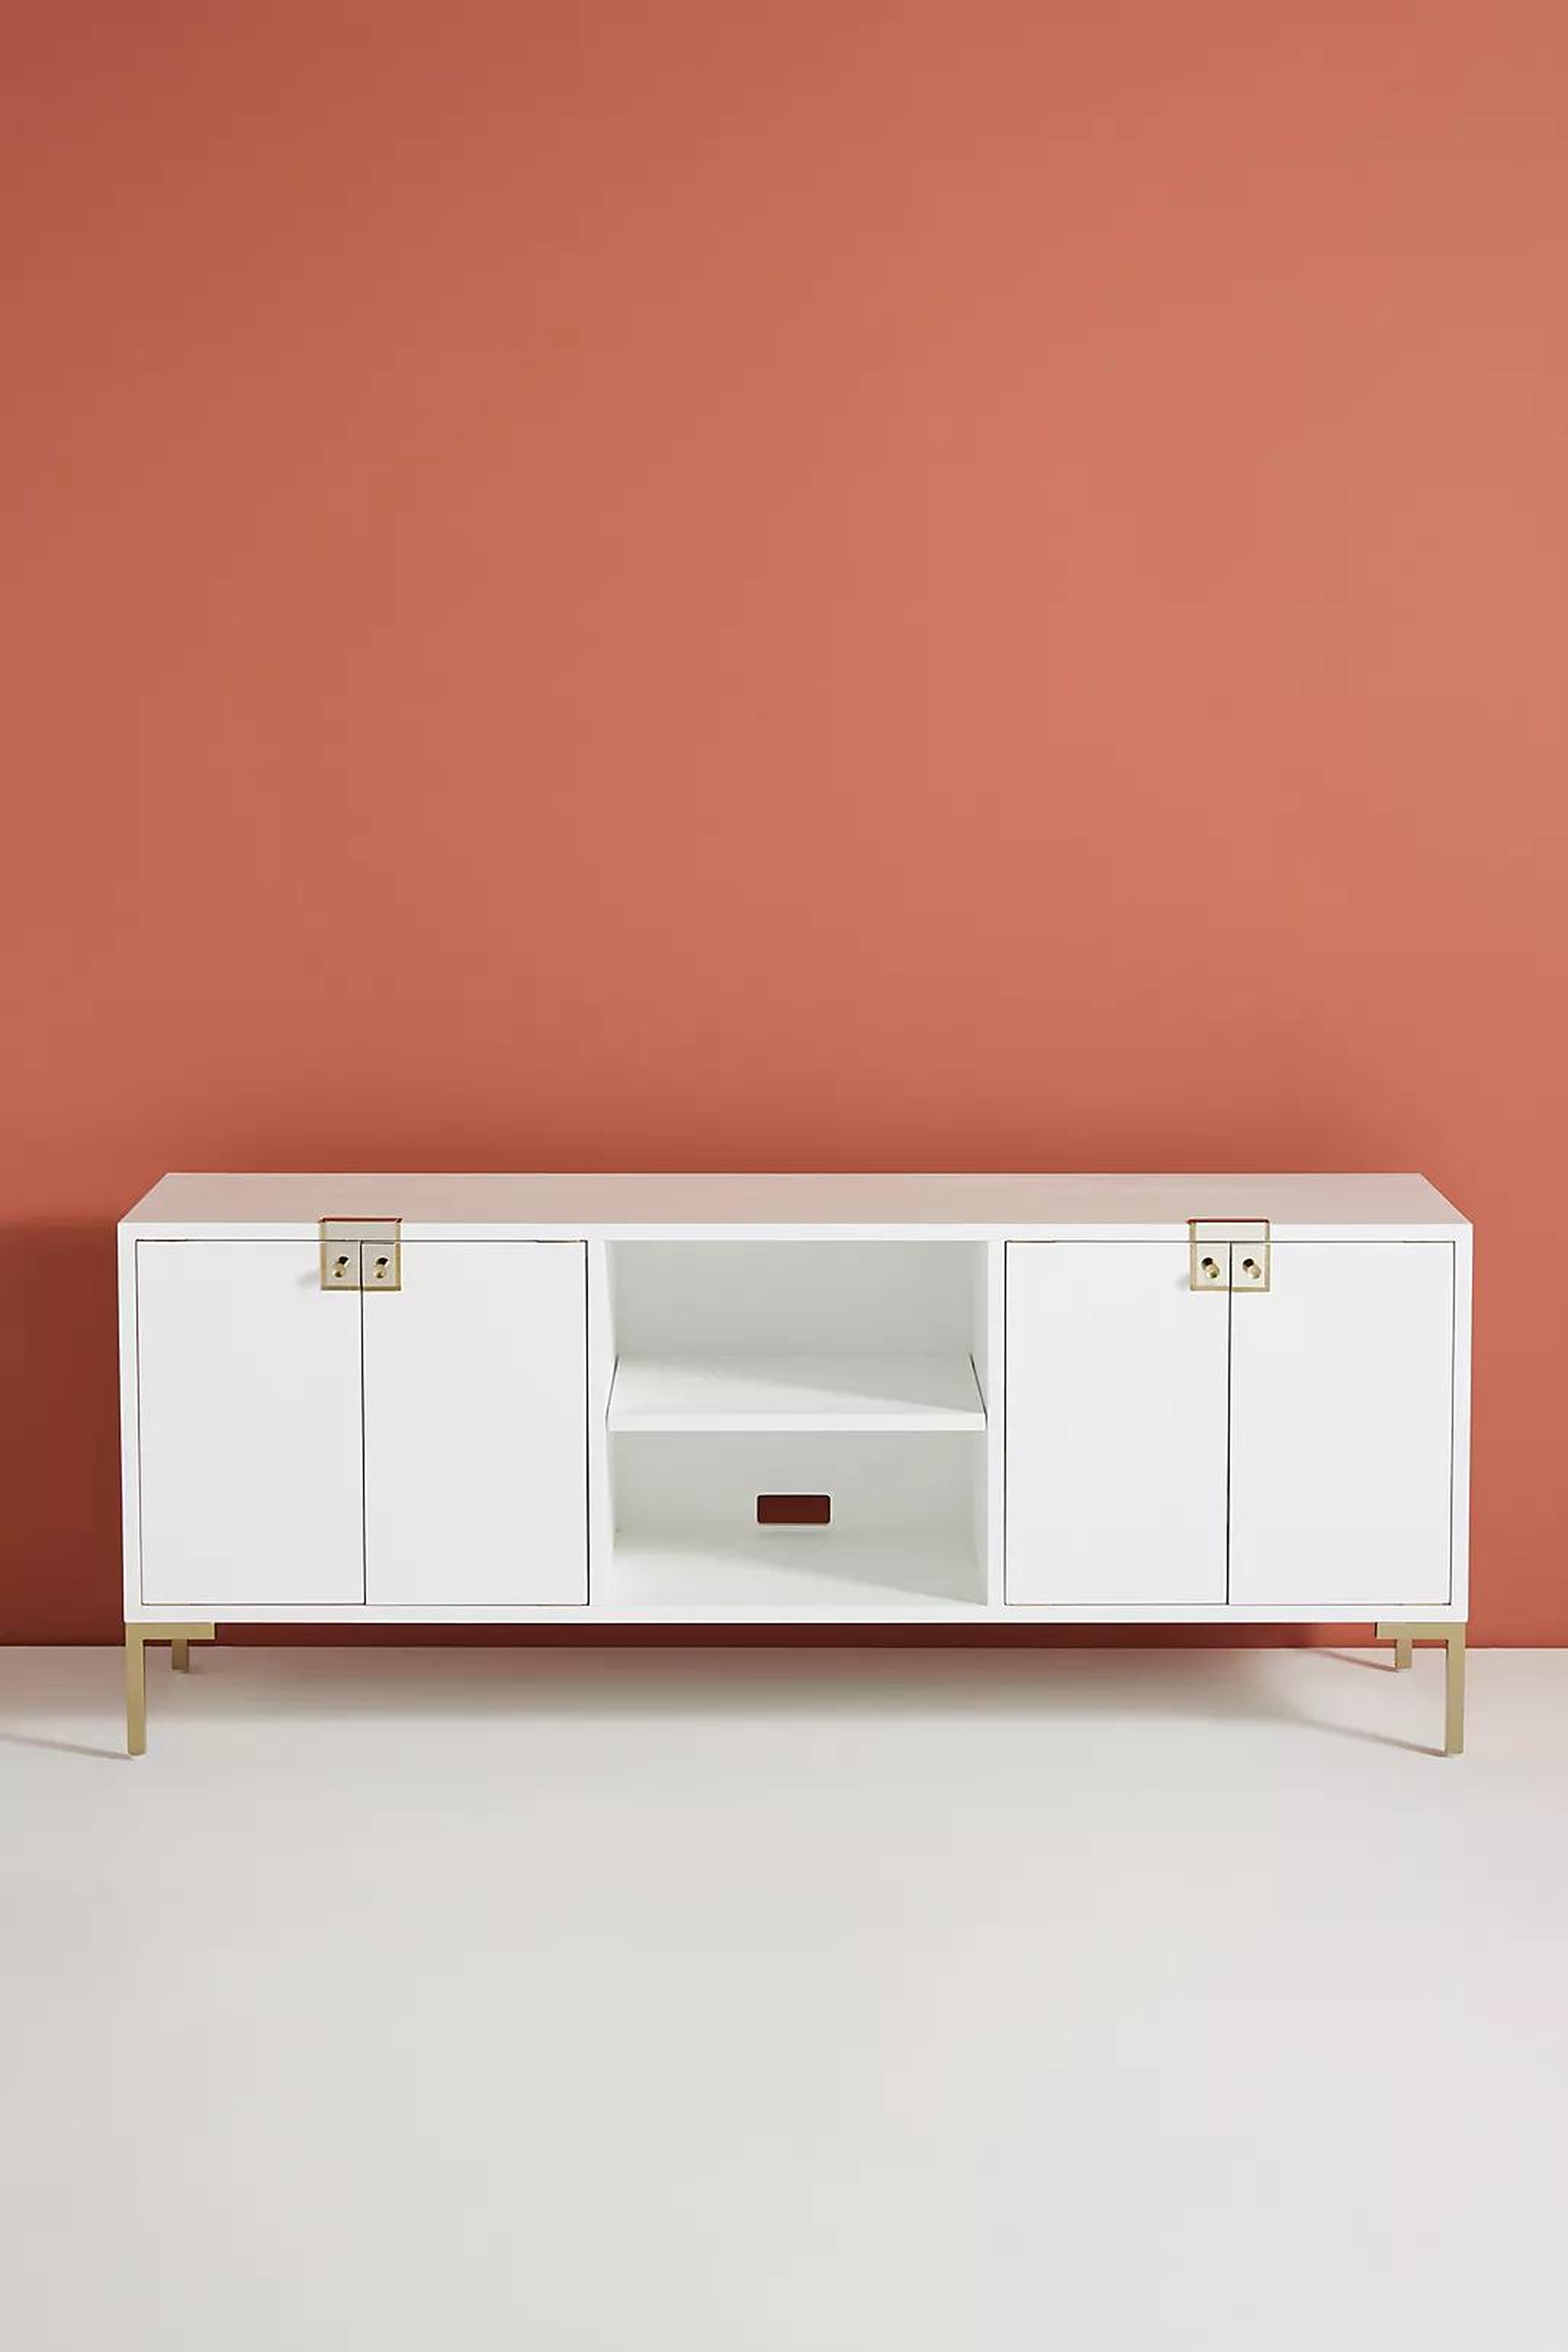 Ingram Media Console By Anthropologie in White - Anthropologie